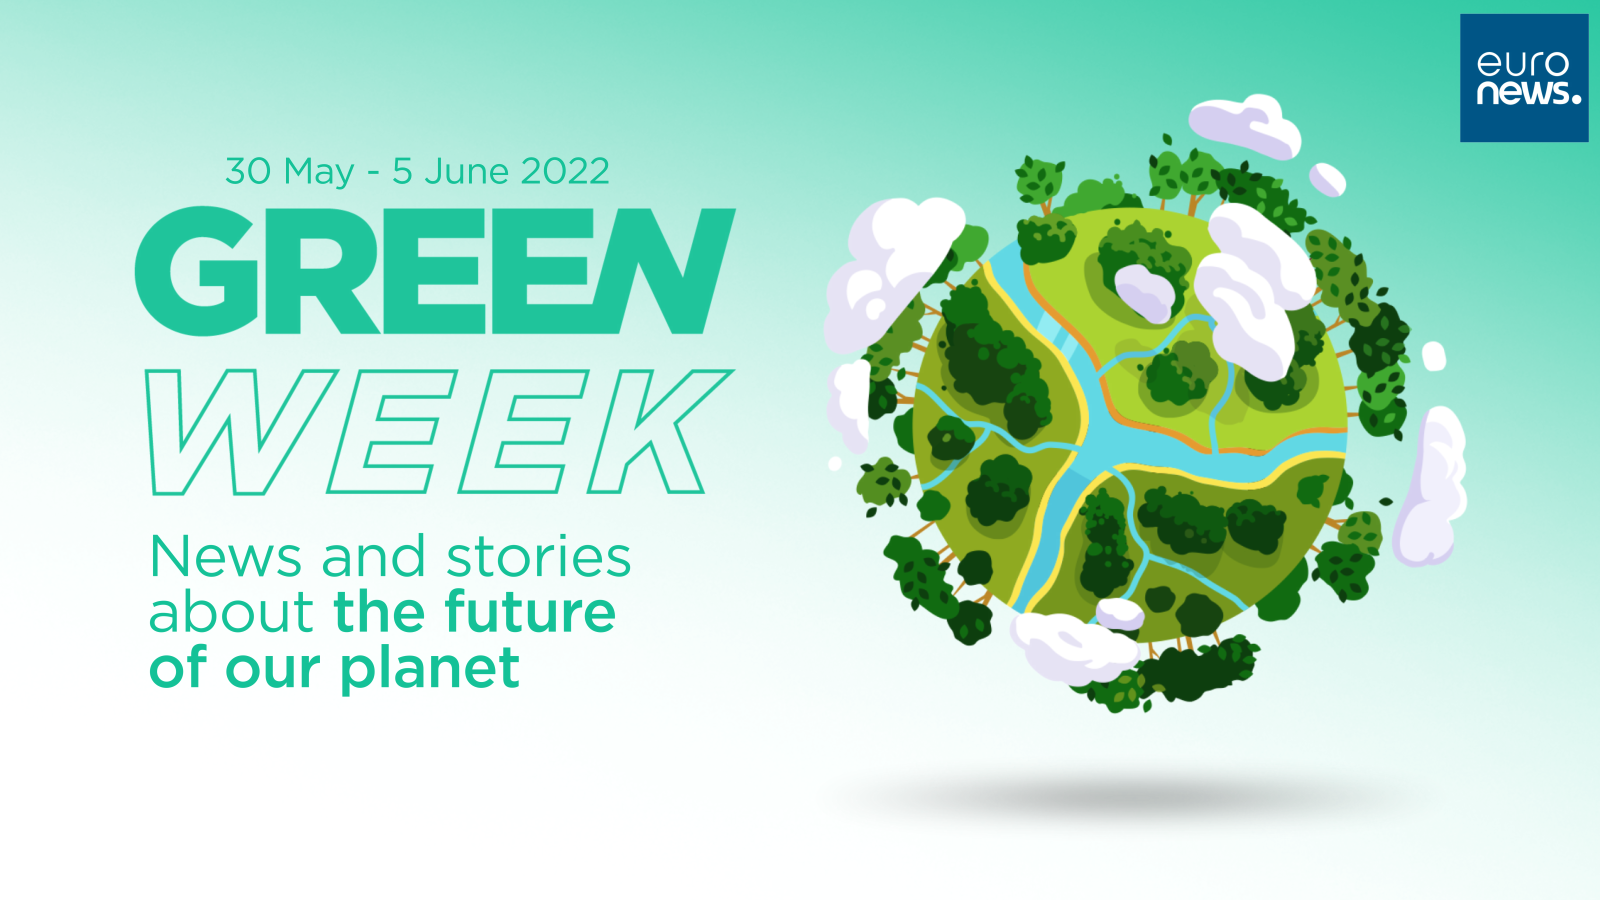 Euronews rounds off another successful edition of its Green Week Euronews